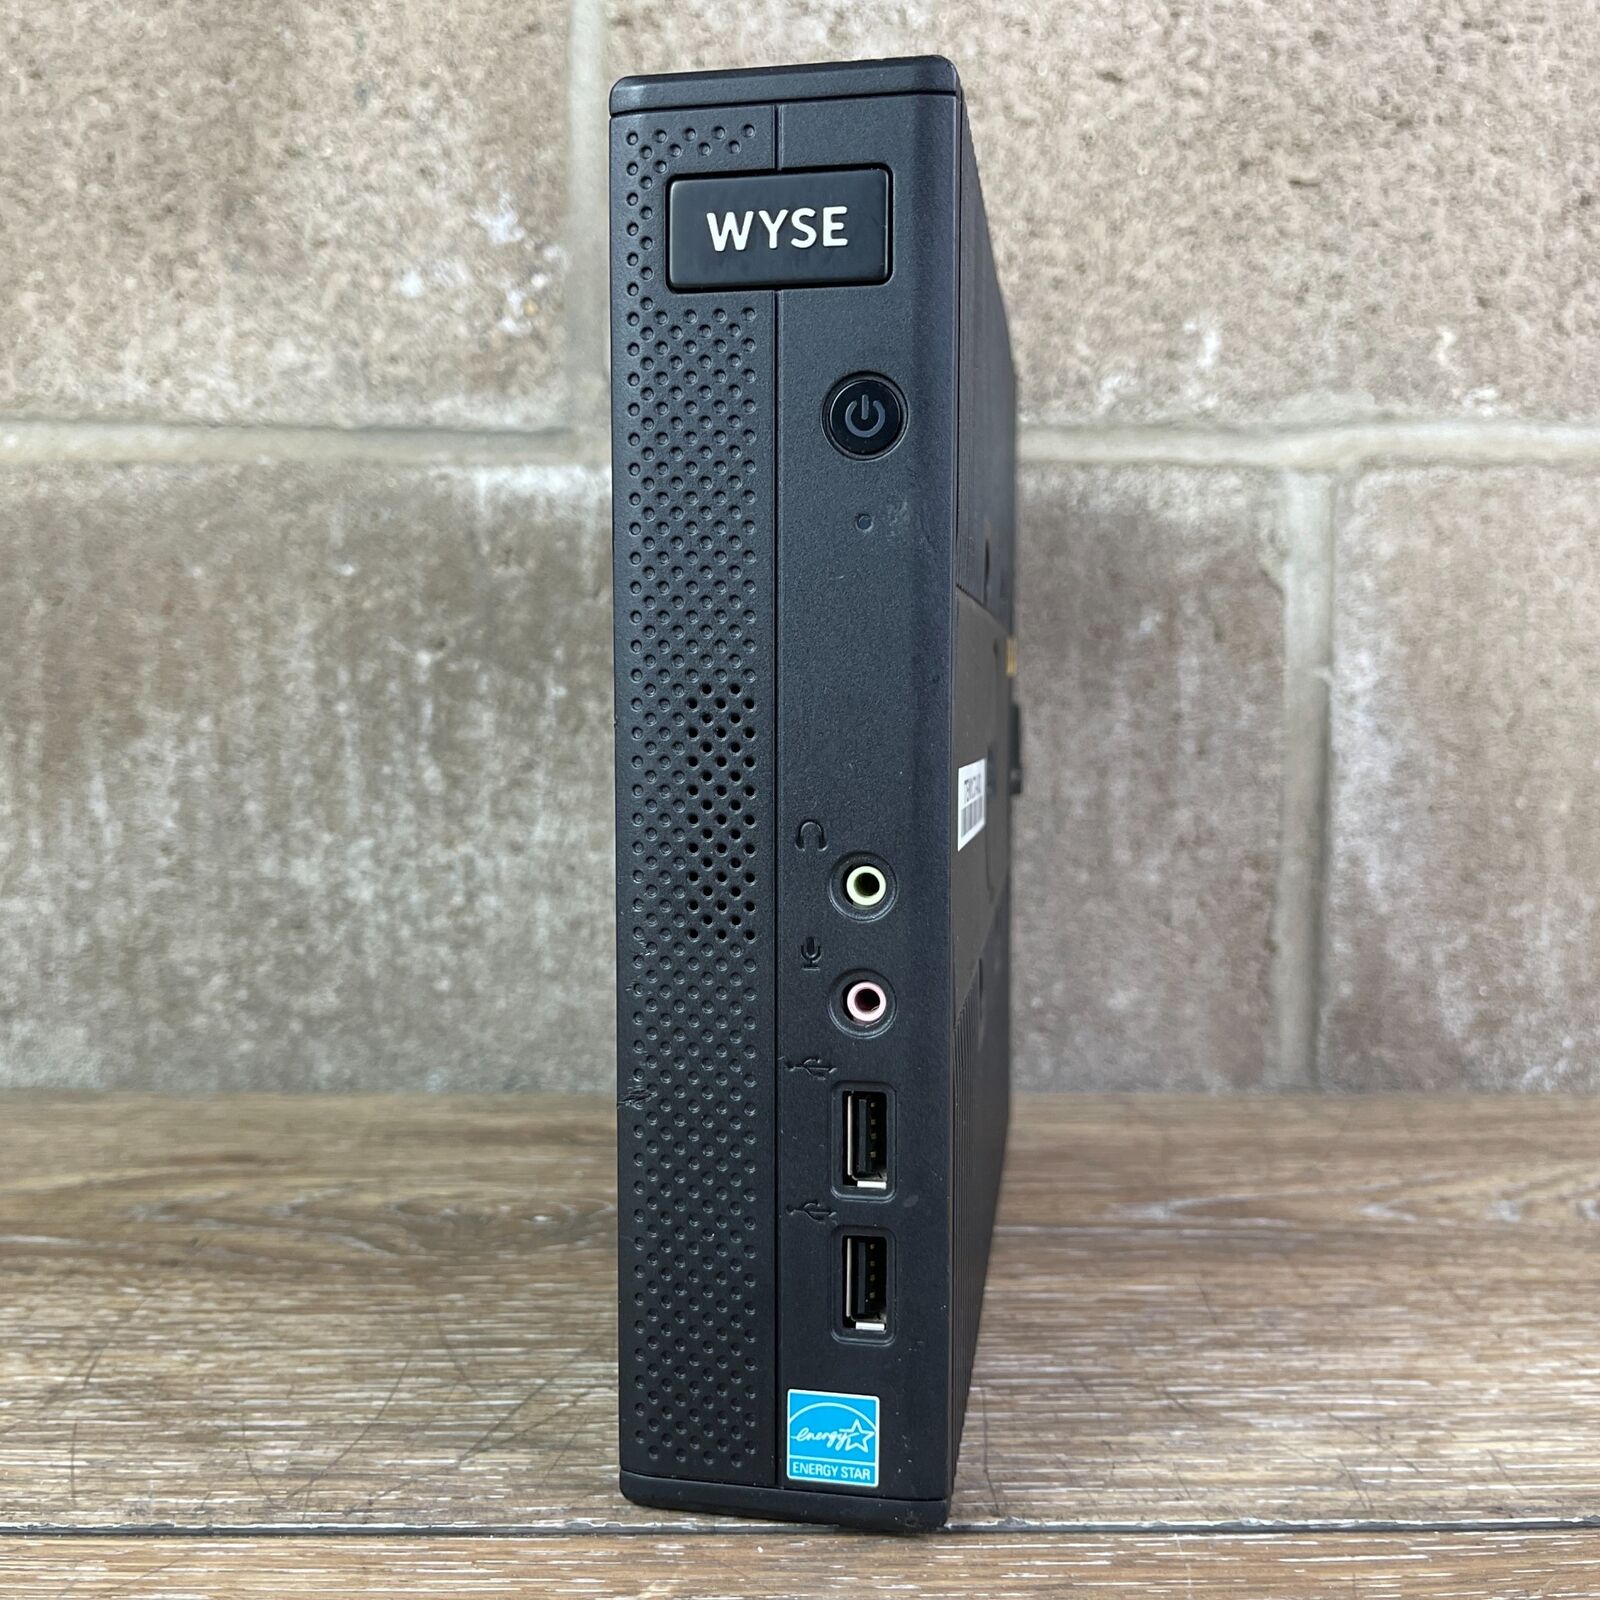 Dell Wyse Zx0 7010 Black AMD G-Series G-T56N Dual-Core DDR3 Thin Client For PC